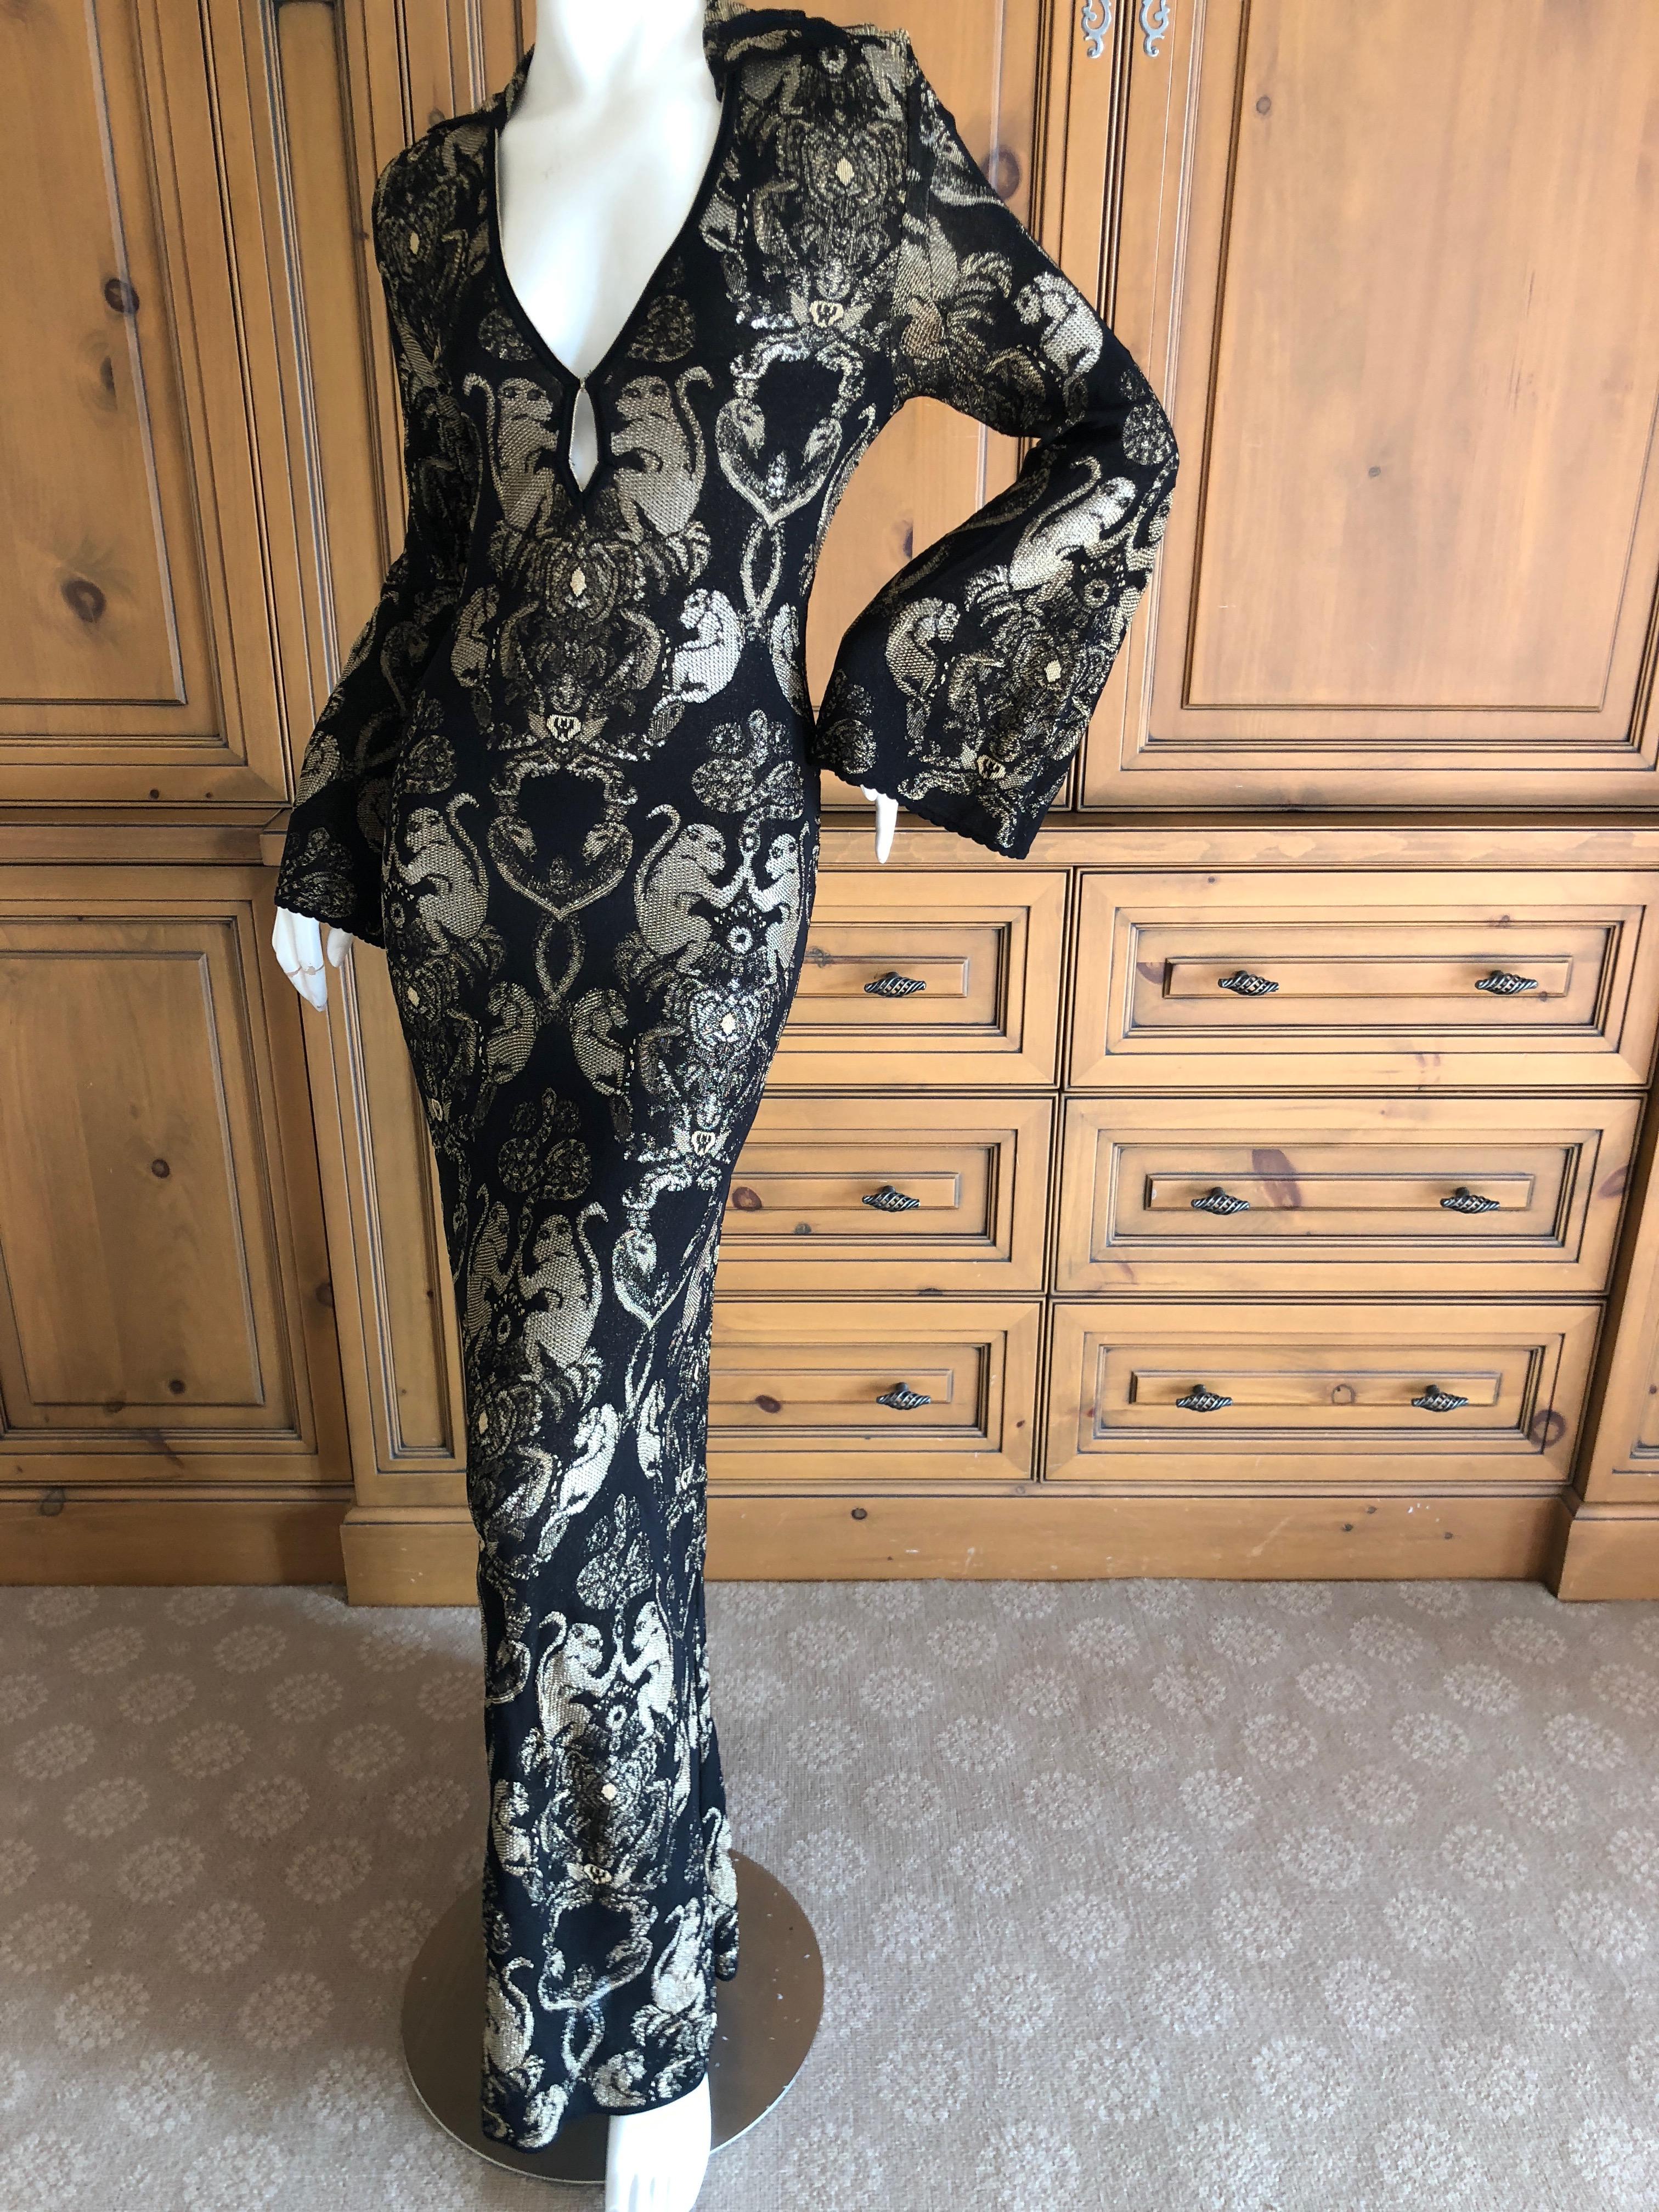 Roberto Cavalli Vintage Golden Monkey Pattern Low Cut Keyhole Knit Evening Dress.
So unusual, the monkey pattern is in gold thread on a rich brown .
There is a lot of stretch in this knit fabric.
Size 44
Bust 36